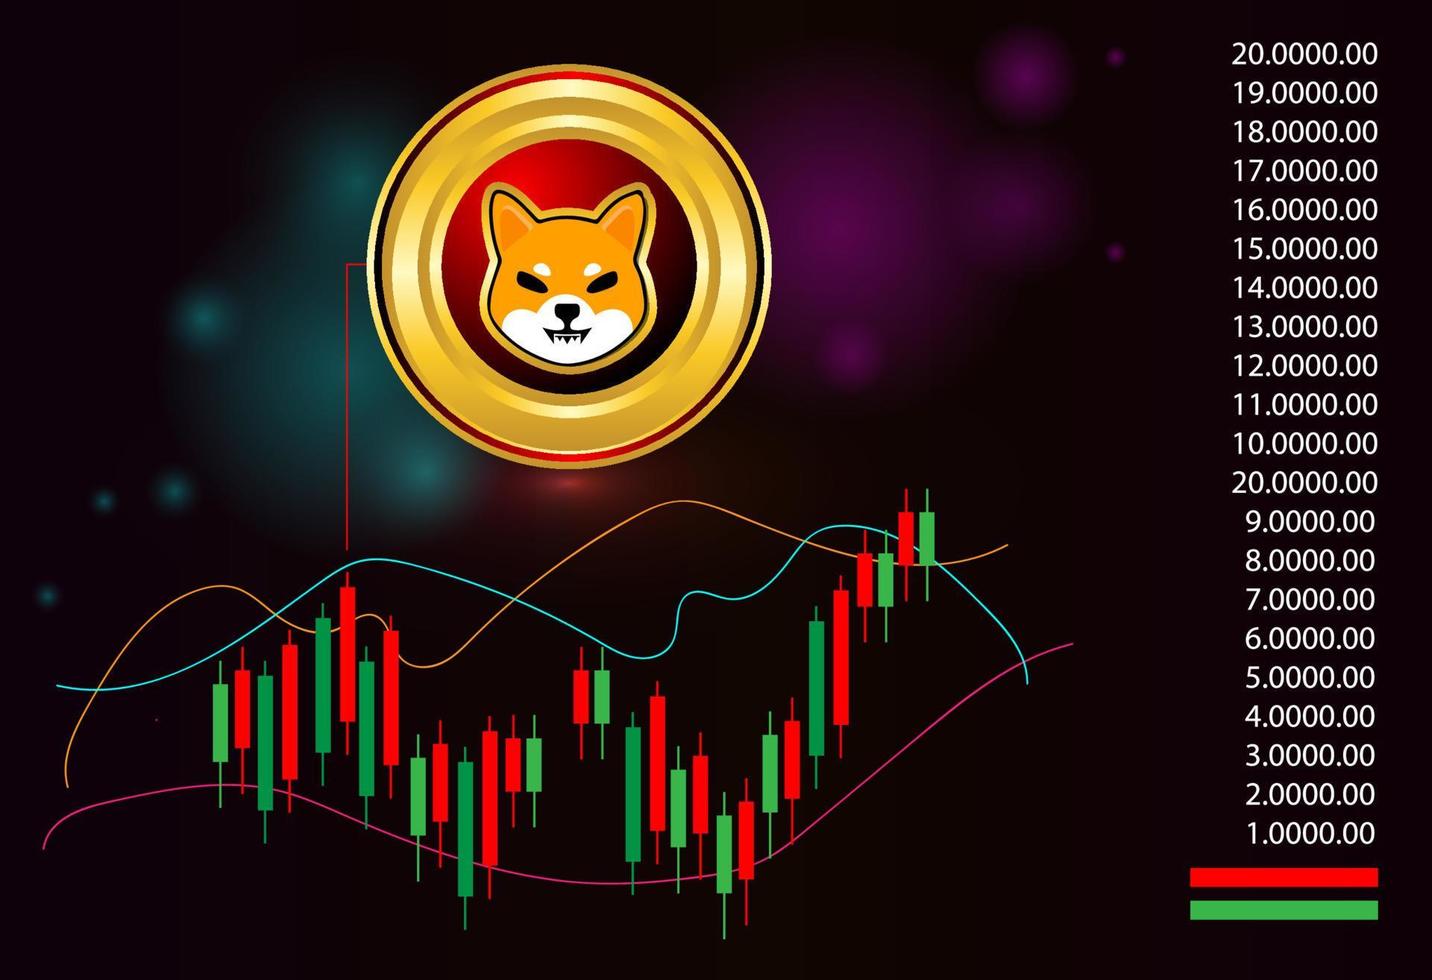 shiba inu coin cryptocurrency trading illustration background vector